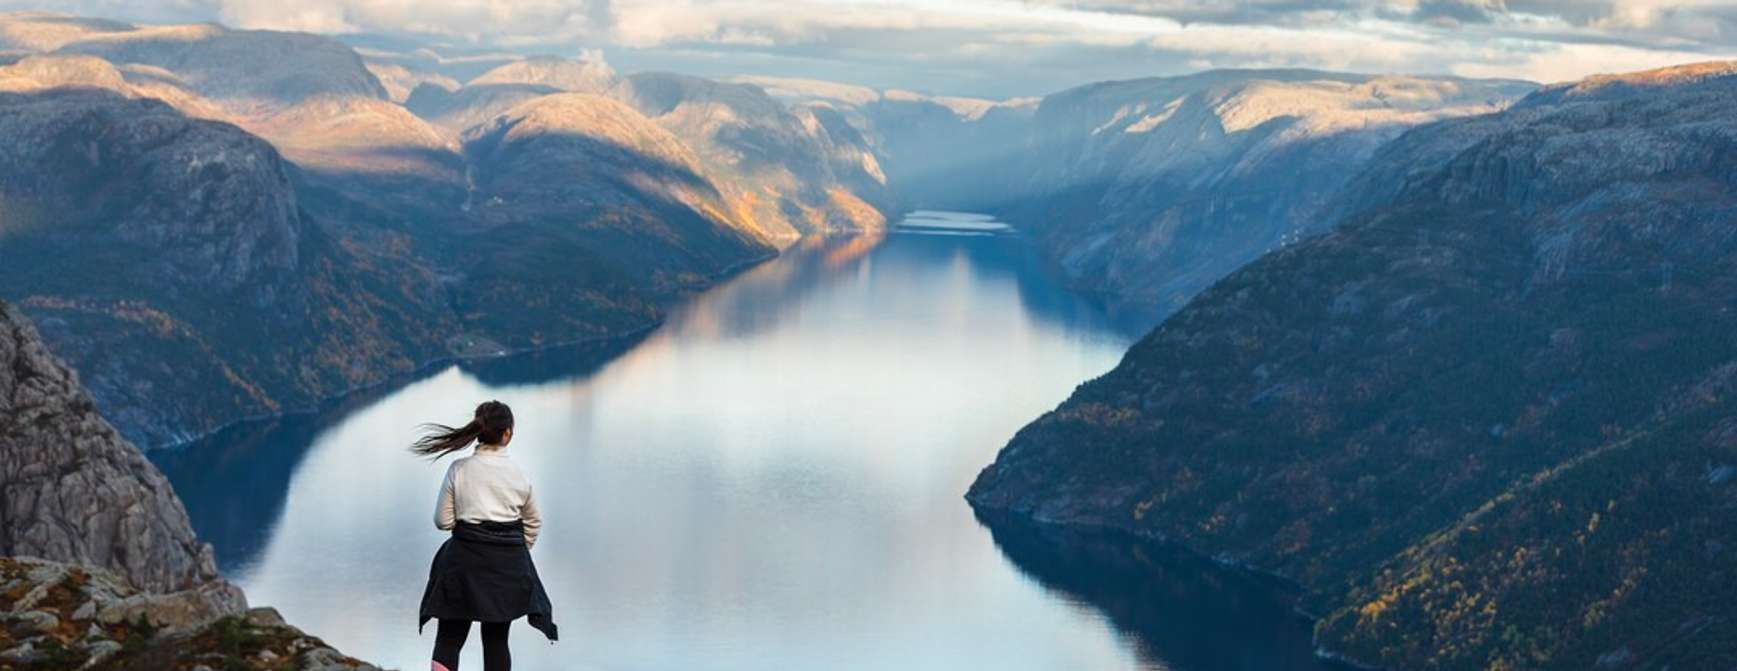 A woman stands on a mountain and looks out over a fjord.